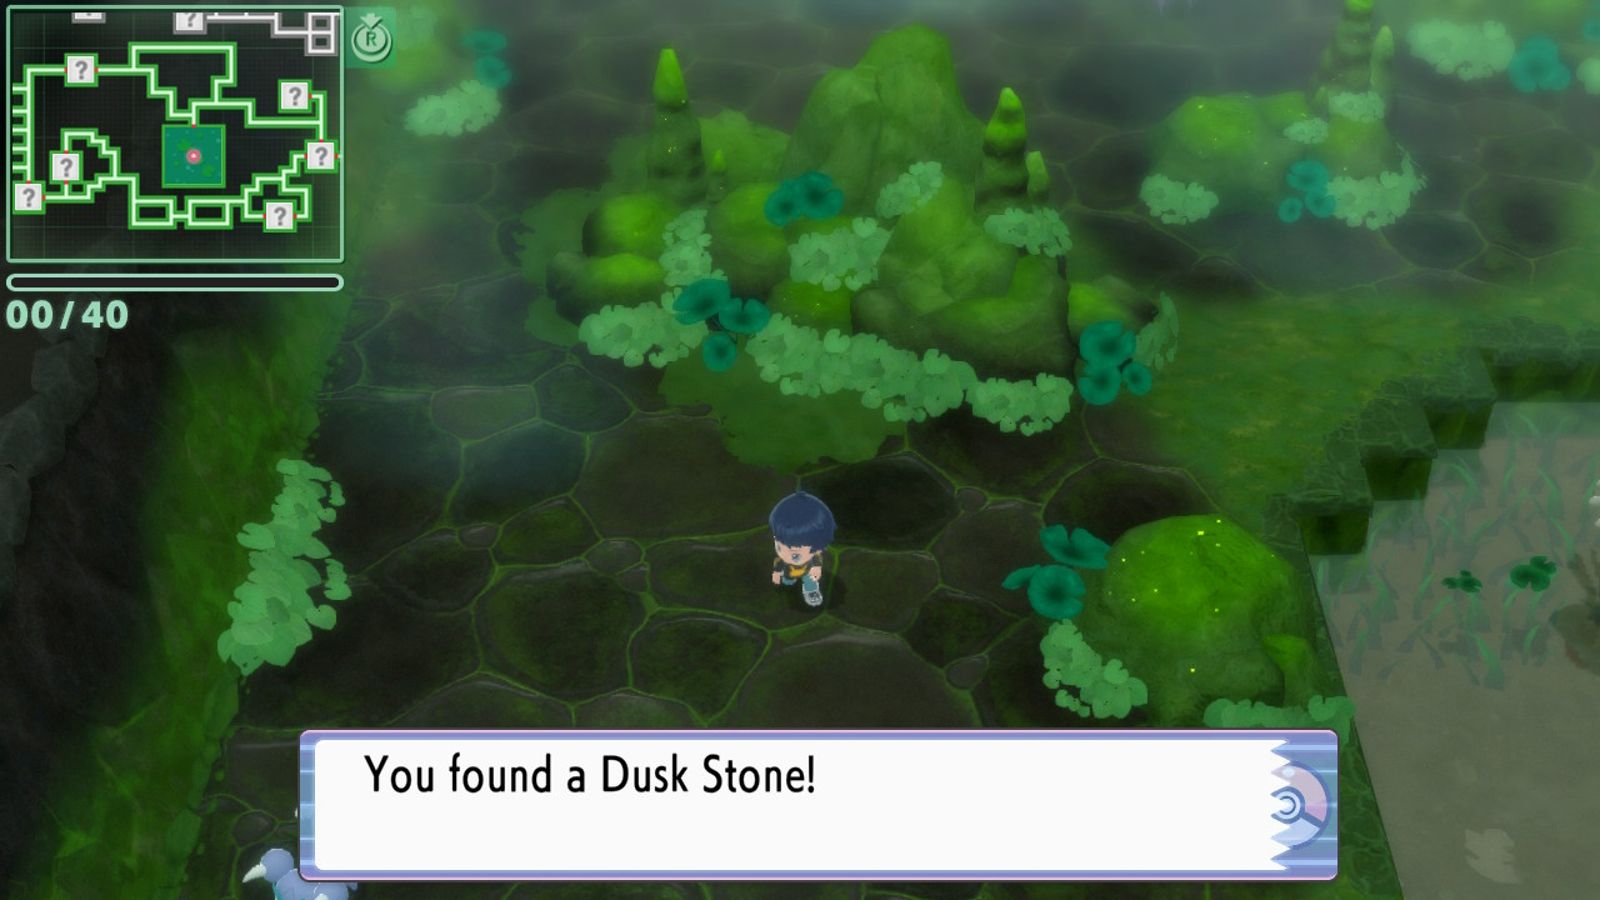 Dusk Stones can be used to evolve Pokémon in Brilliant Diamond and Shining Pearl.